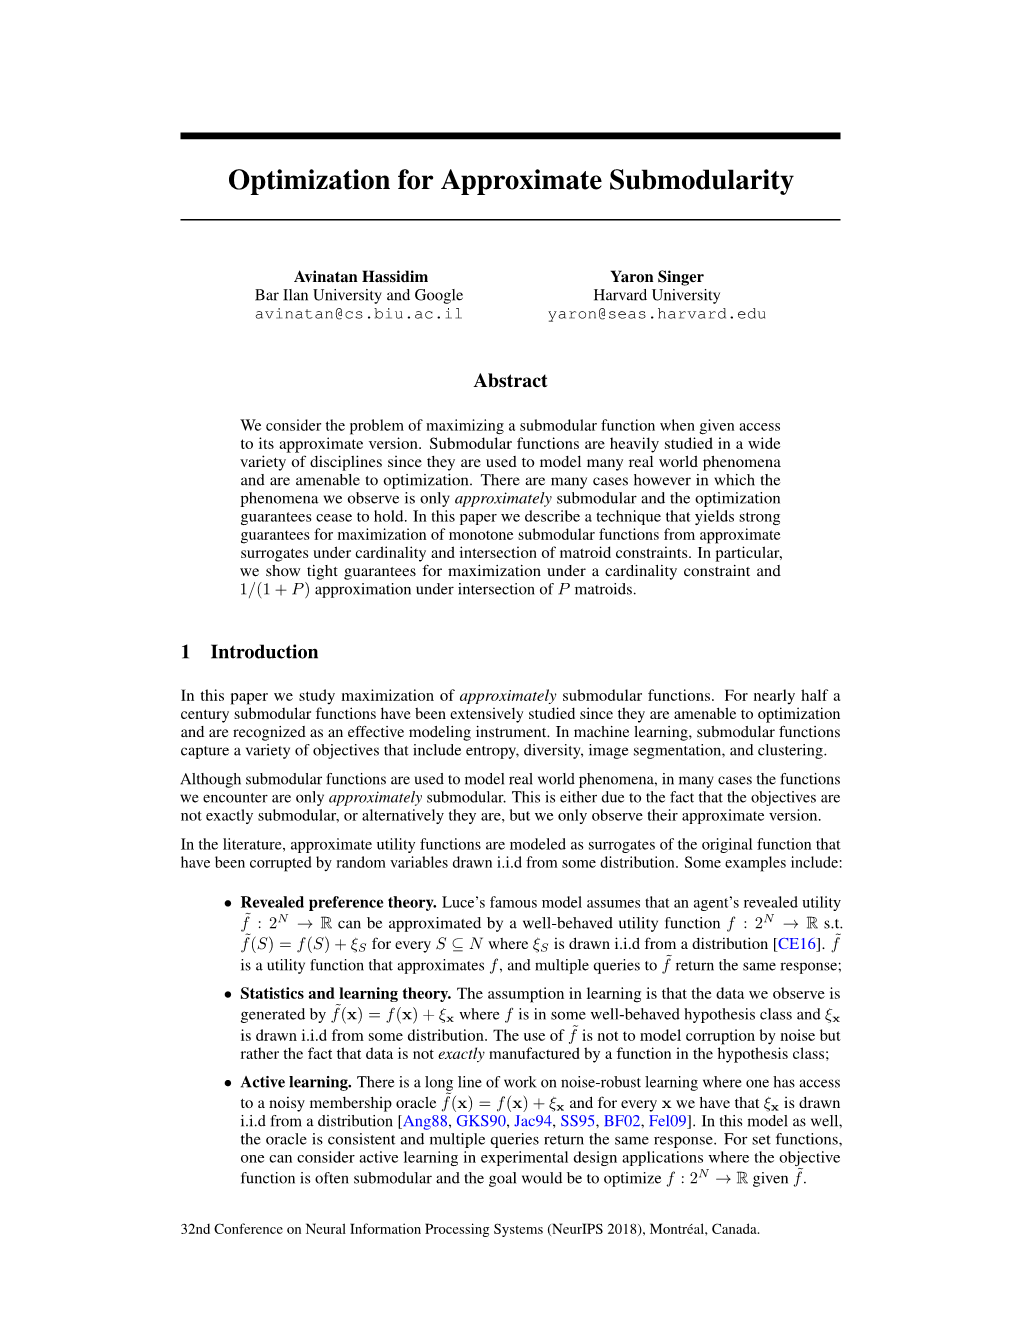 Optimization for Approximate Submodularity